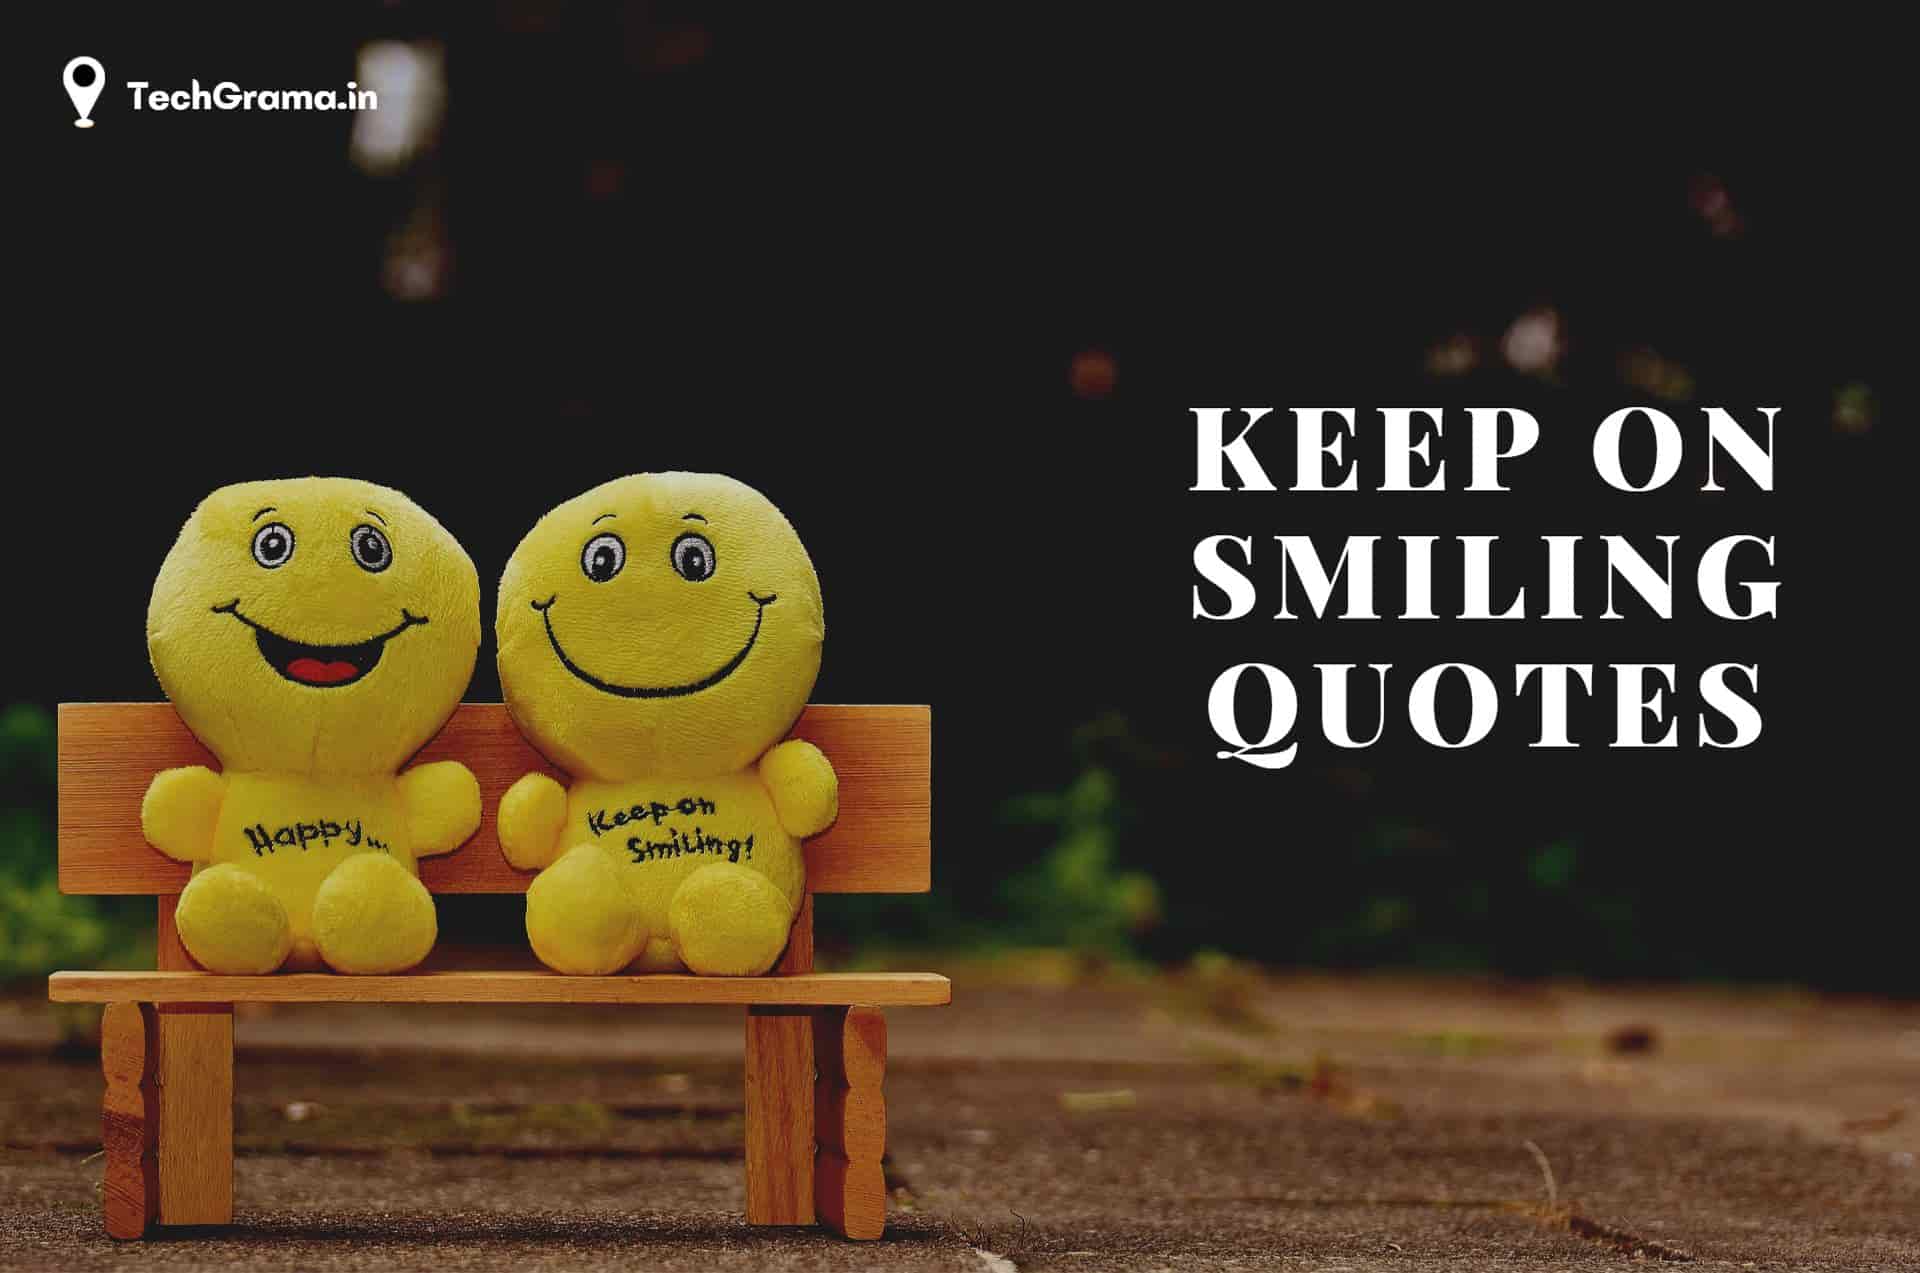 Best Keep Smiling Quotes For Instagram, Keep Smiling Caption, Always Keep Smiling Quotes, Keep Smiling Quotes For Best Friend, Always Keep Smiling And Be Happy, Keep on Smiling Quotes, Keep Smiling Keep Shining Quotes, Keep Smile Always, Keep Smiling Status, Keep Smiling Quotes For Him & Her.